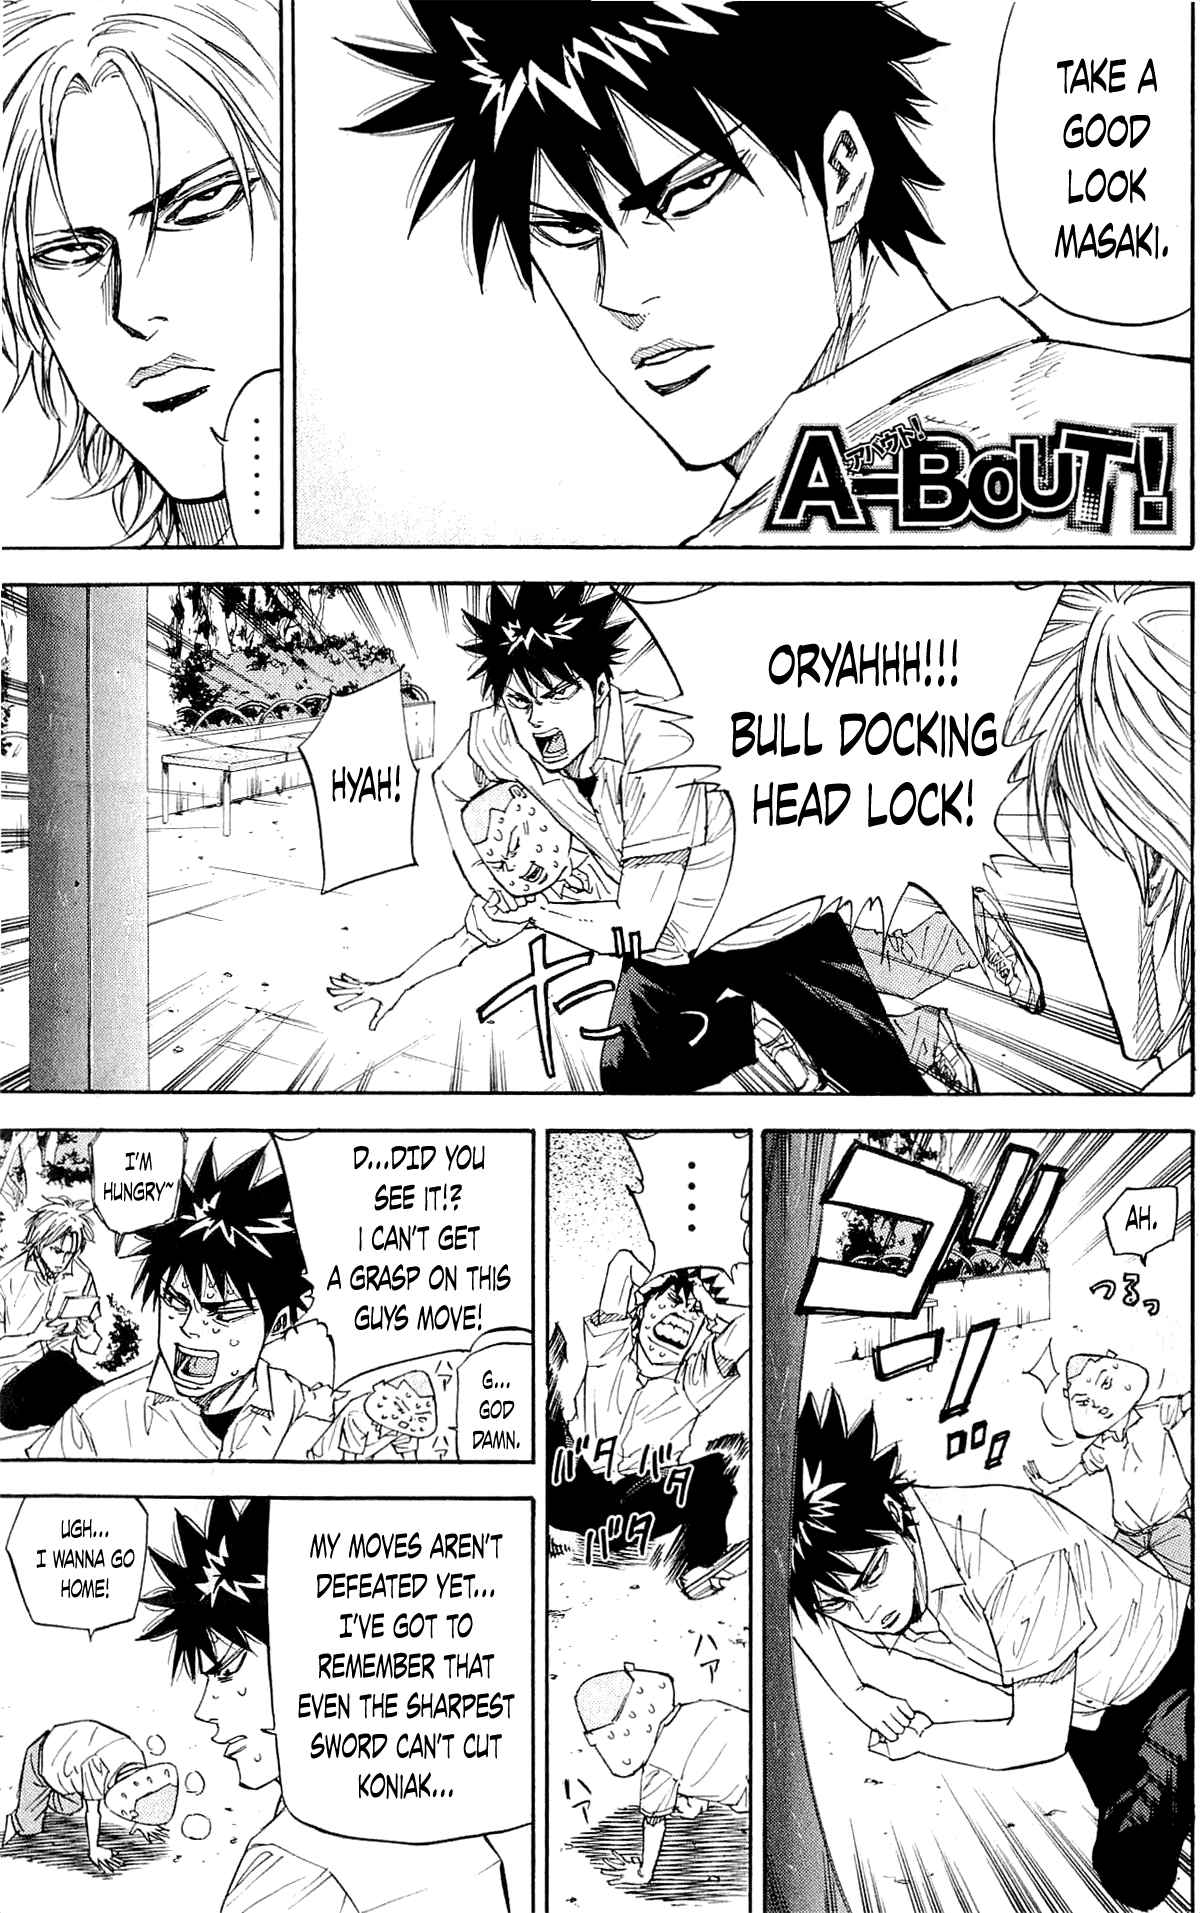 A-bout! Vol.5 Ch.36